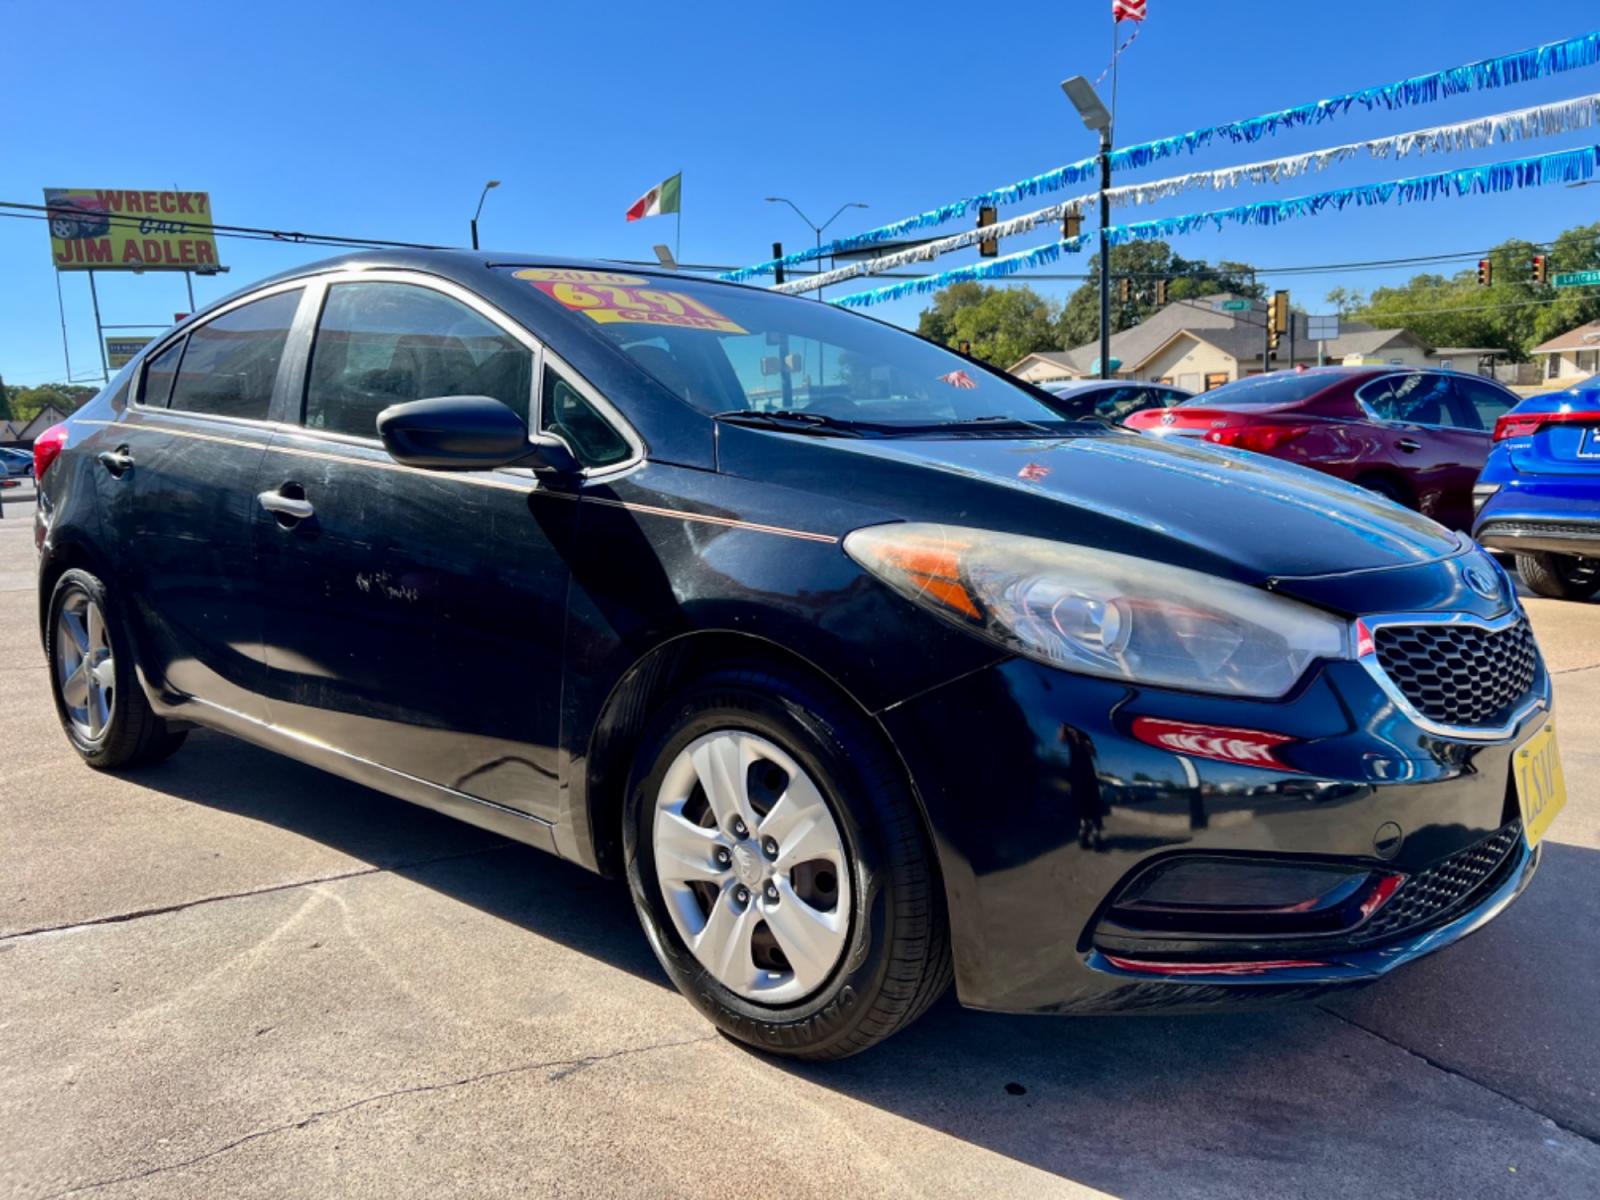 2016 BLACK KIA FORTE LX (KNAFK4A61G5) , located at 5900 E. Lancaster Ave., Fort Worth, TX, 76112, (817) 457-5456, 0.000000, 0.000000 - Cash CASH CAR ONLY, NO FINANCING AVAILABLE. THIS 2016 KIA FORTE LX 4 DOOR SEDAN RUNS AND DRIVES GREAT. IT IS EQUIPPED WITH A CD PLAYER, AM/FM RADIO AND AN AUX PORT. THE TIRES ARE IN GOOD CONDITION AND STILL HAVE TREAD LEFT ON THEM. THIS CAR WILL NOT LAST SO ACT FAST! Call or text Frances a - Photo #8